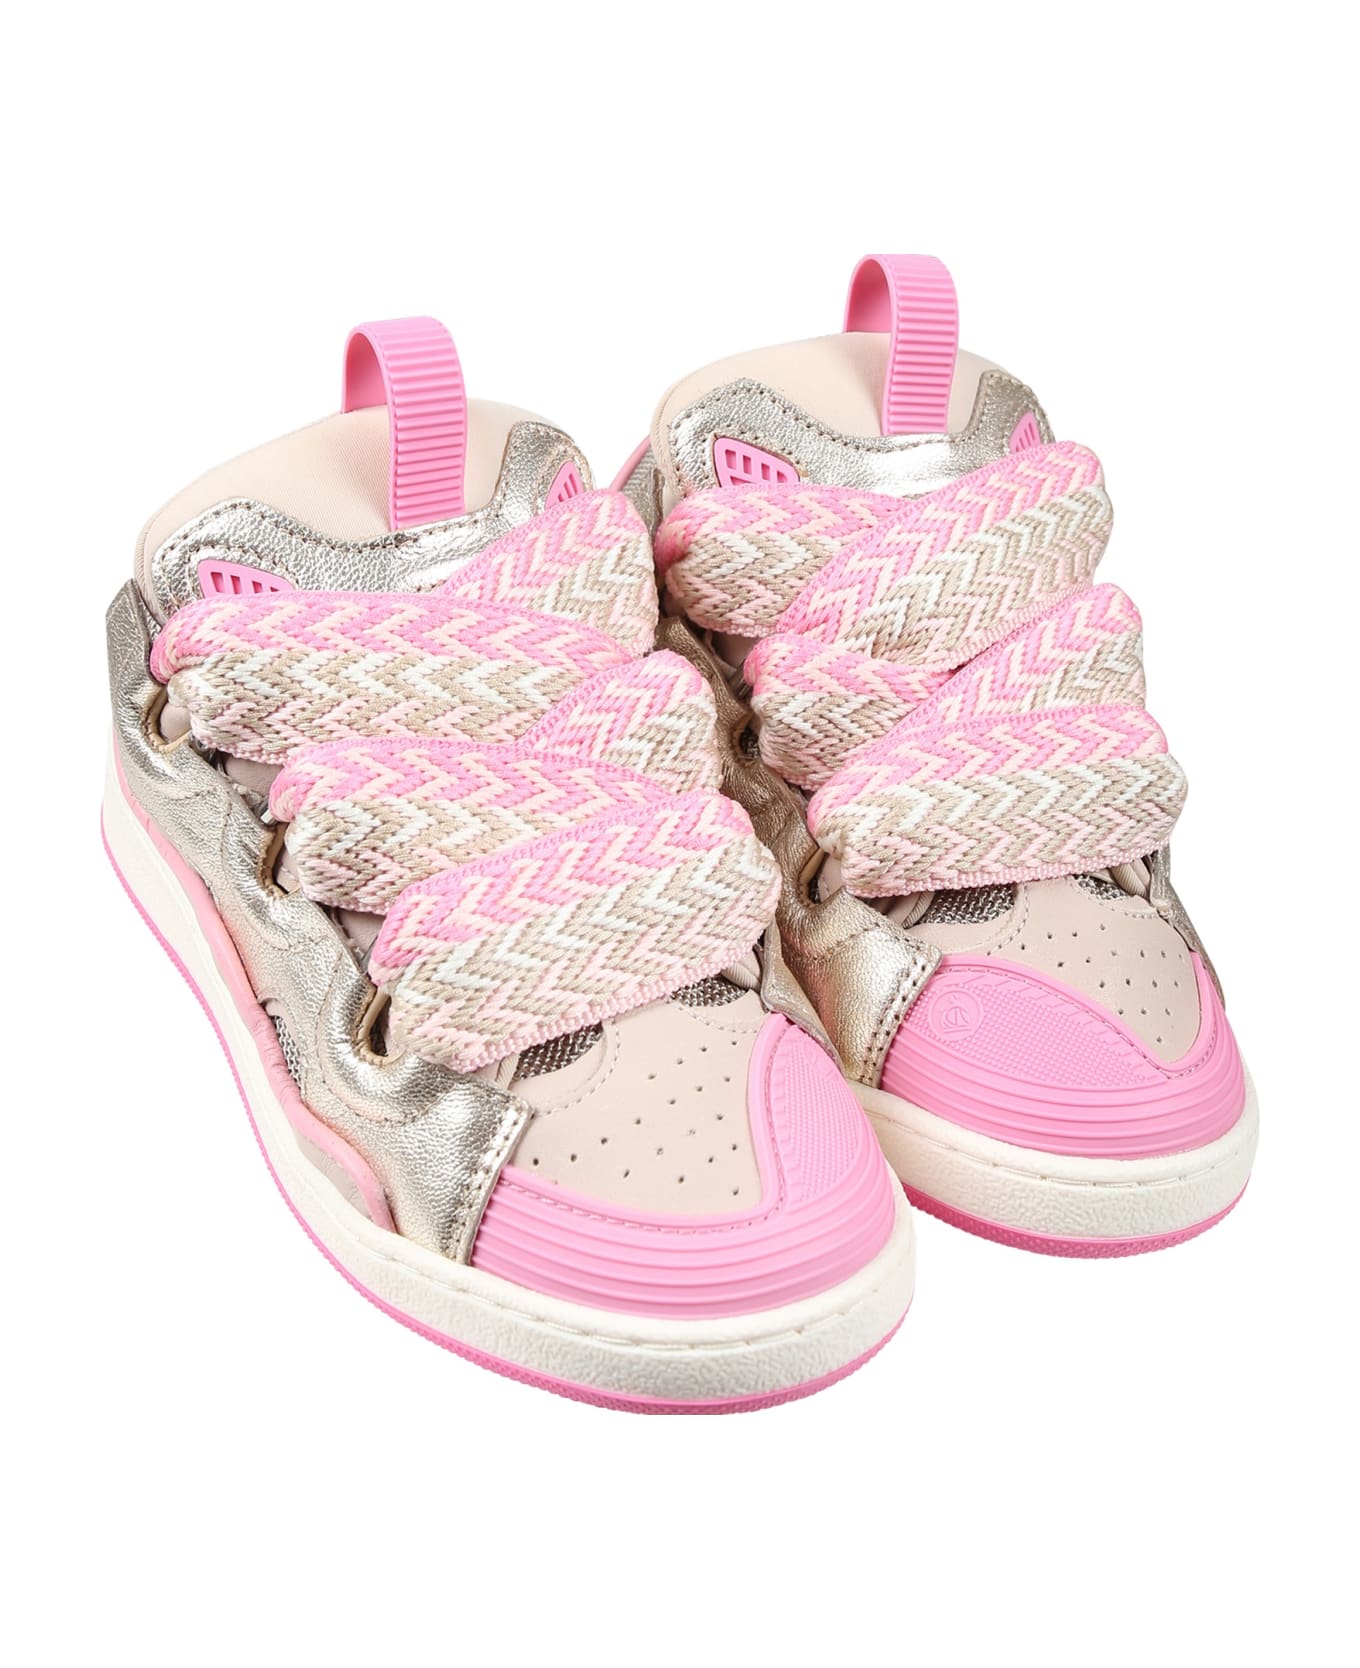 Lanvin Pink Sneakers For Girl - Rosa